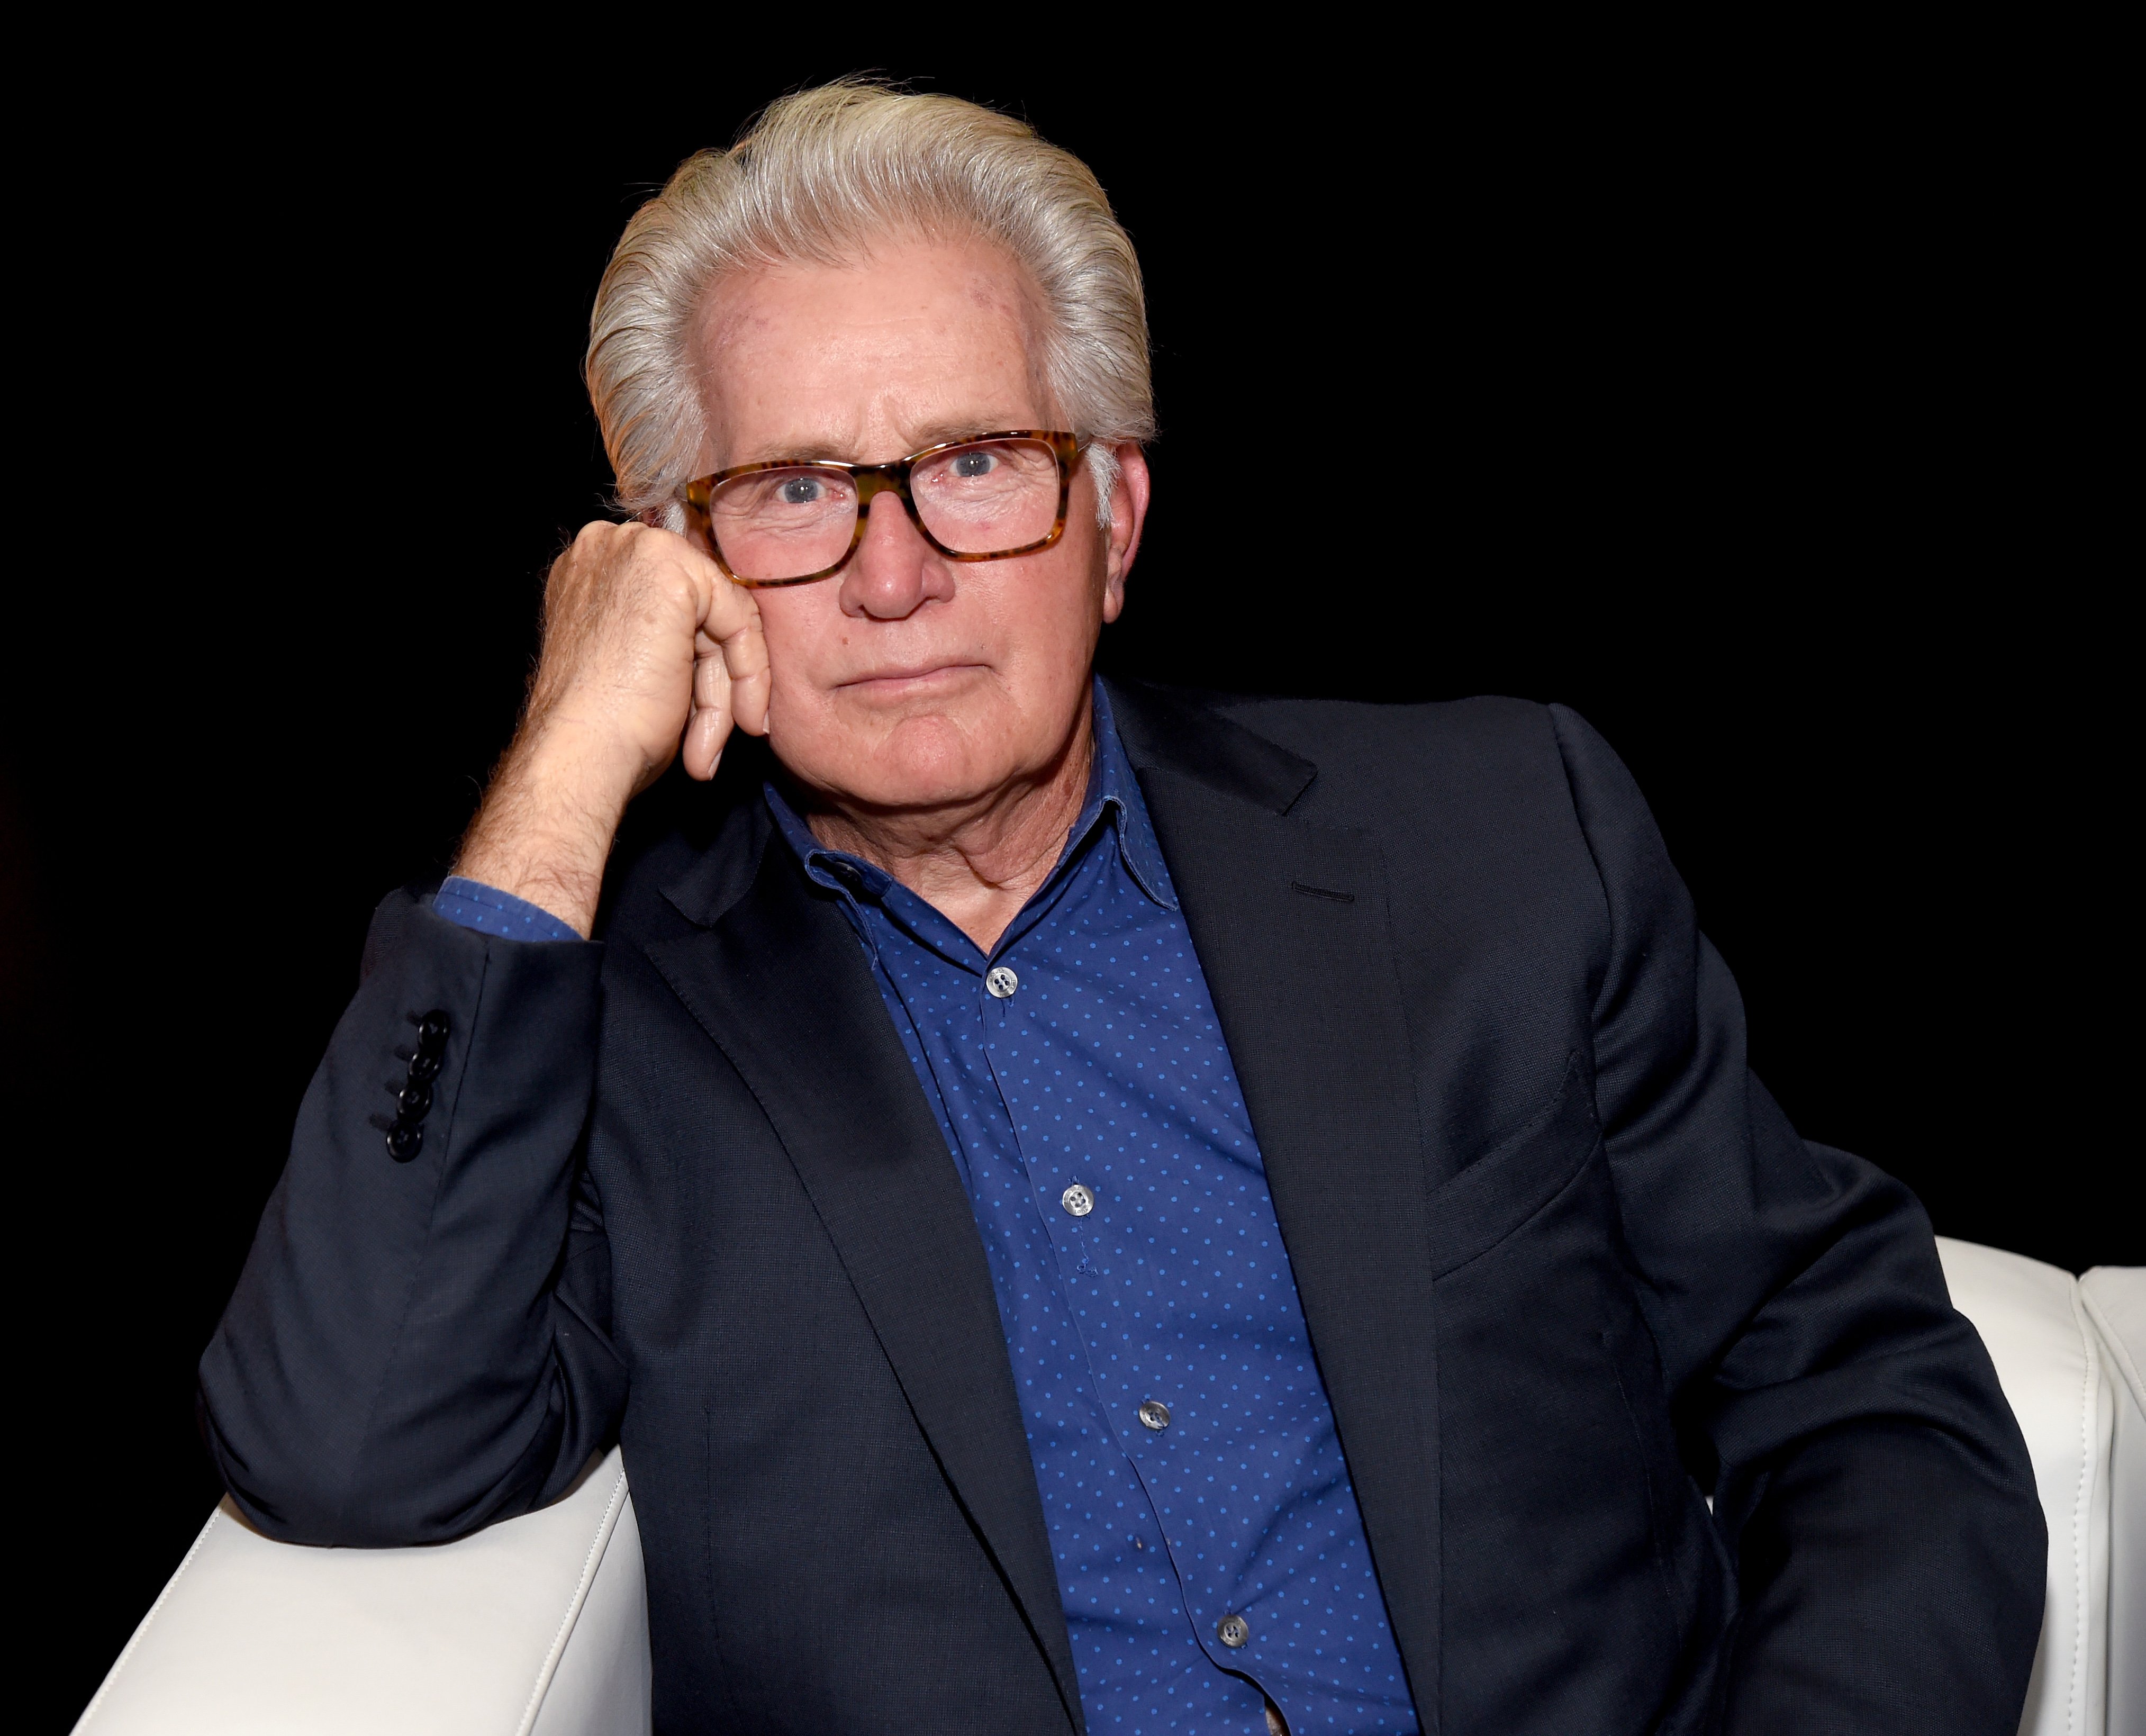 Martin Sheen in California in 2017. | Source: Getty images 